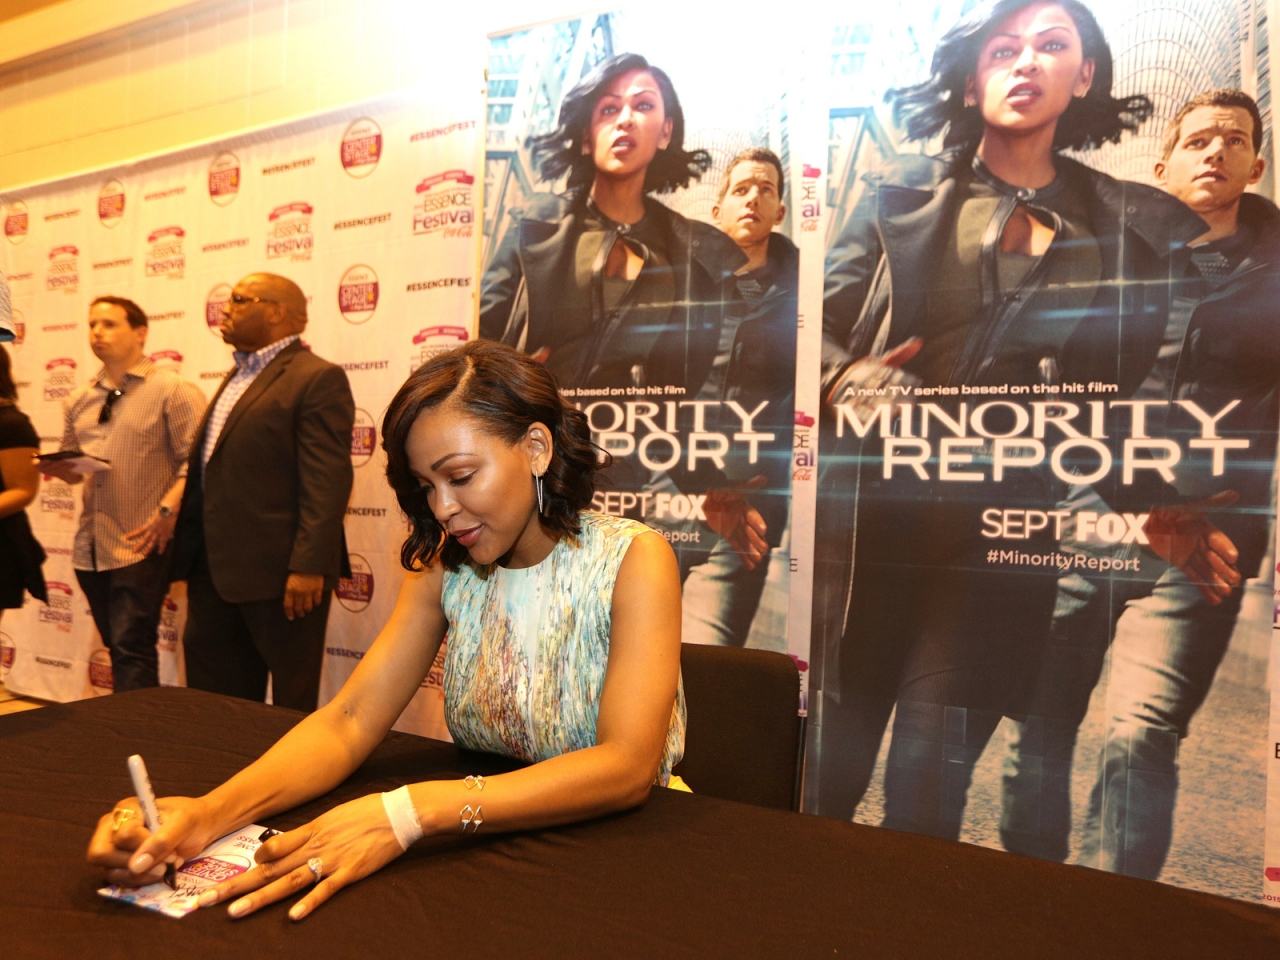 Minority Report Autograph Session for 1280 x 960 resolution